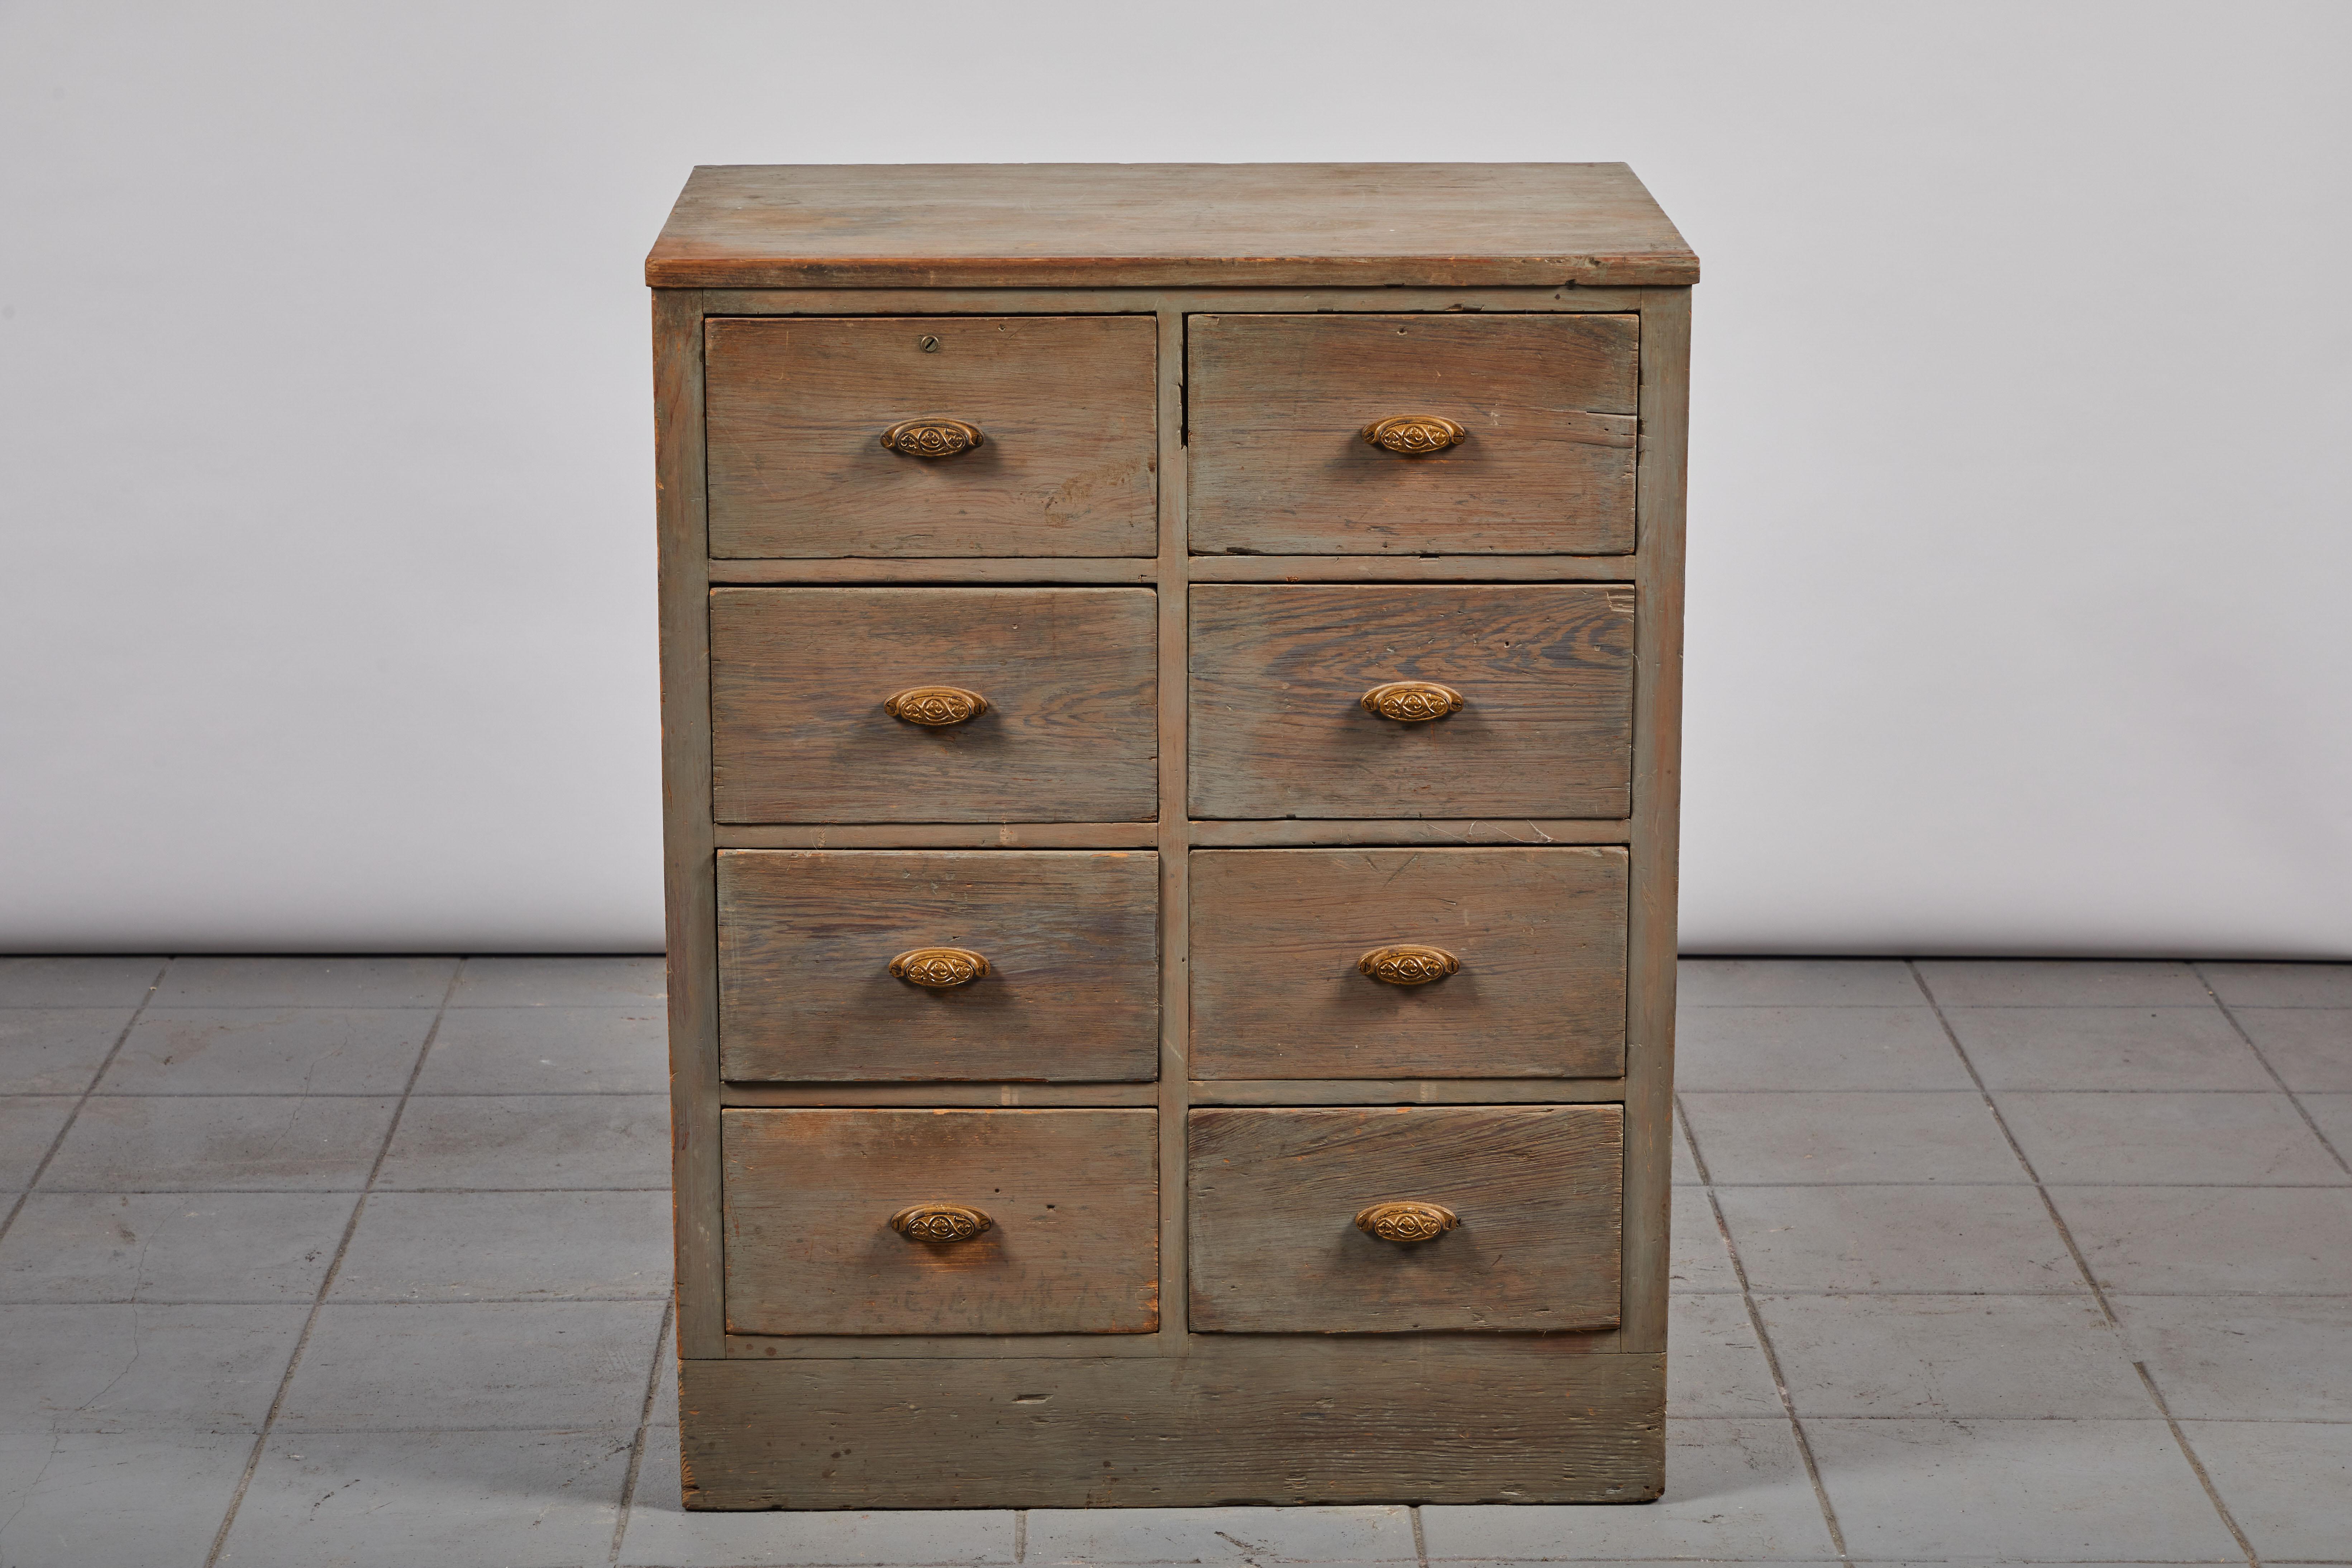 Early American eight-drawer painted dresser, with original hardware.